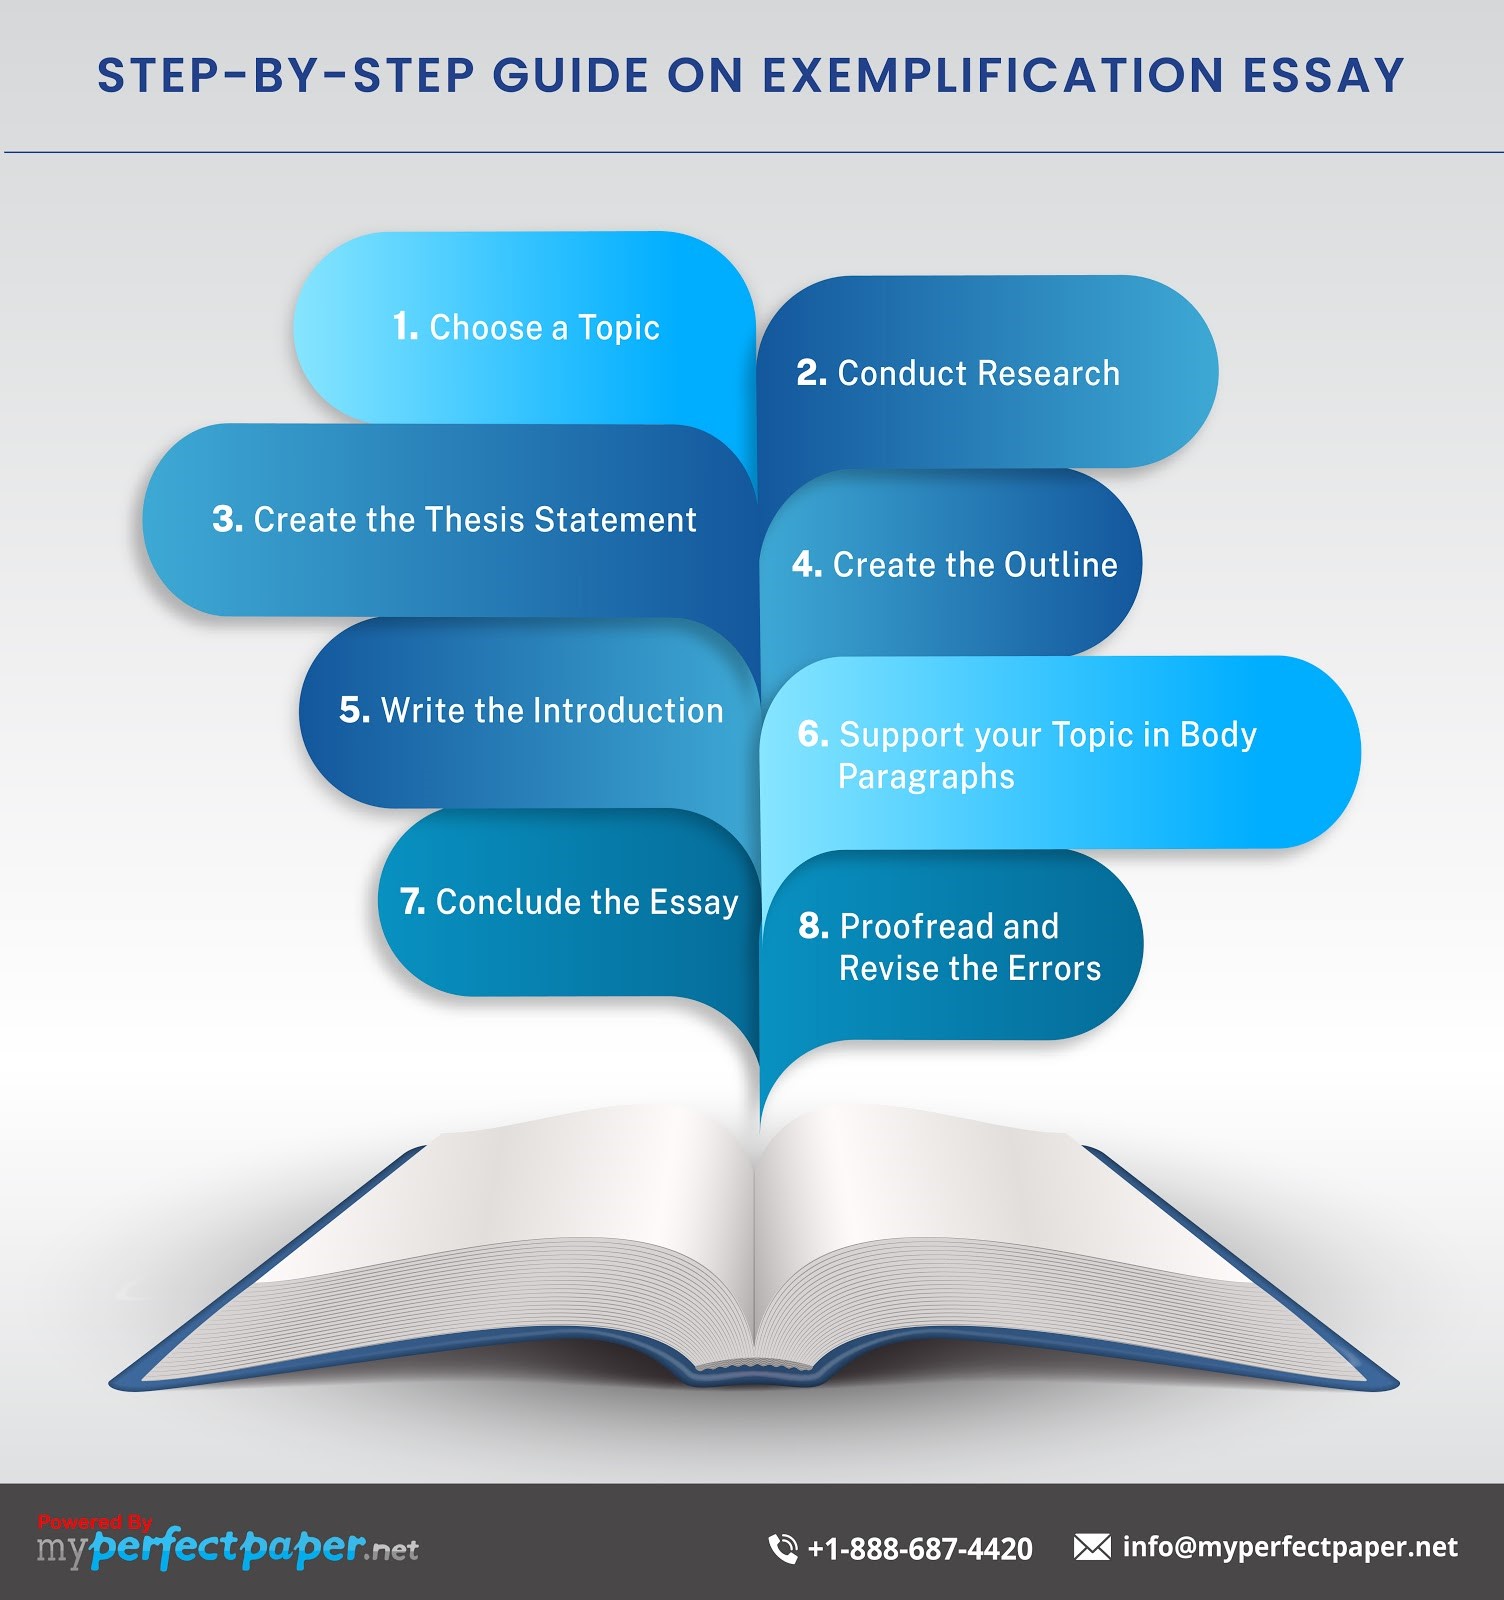 Step-by-Step Guide on Exemplification Essay